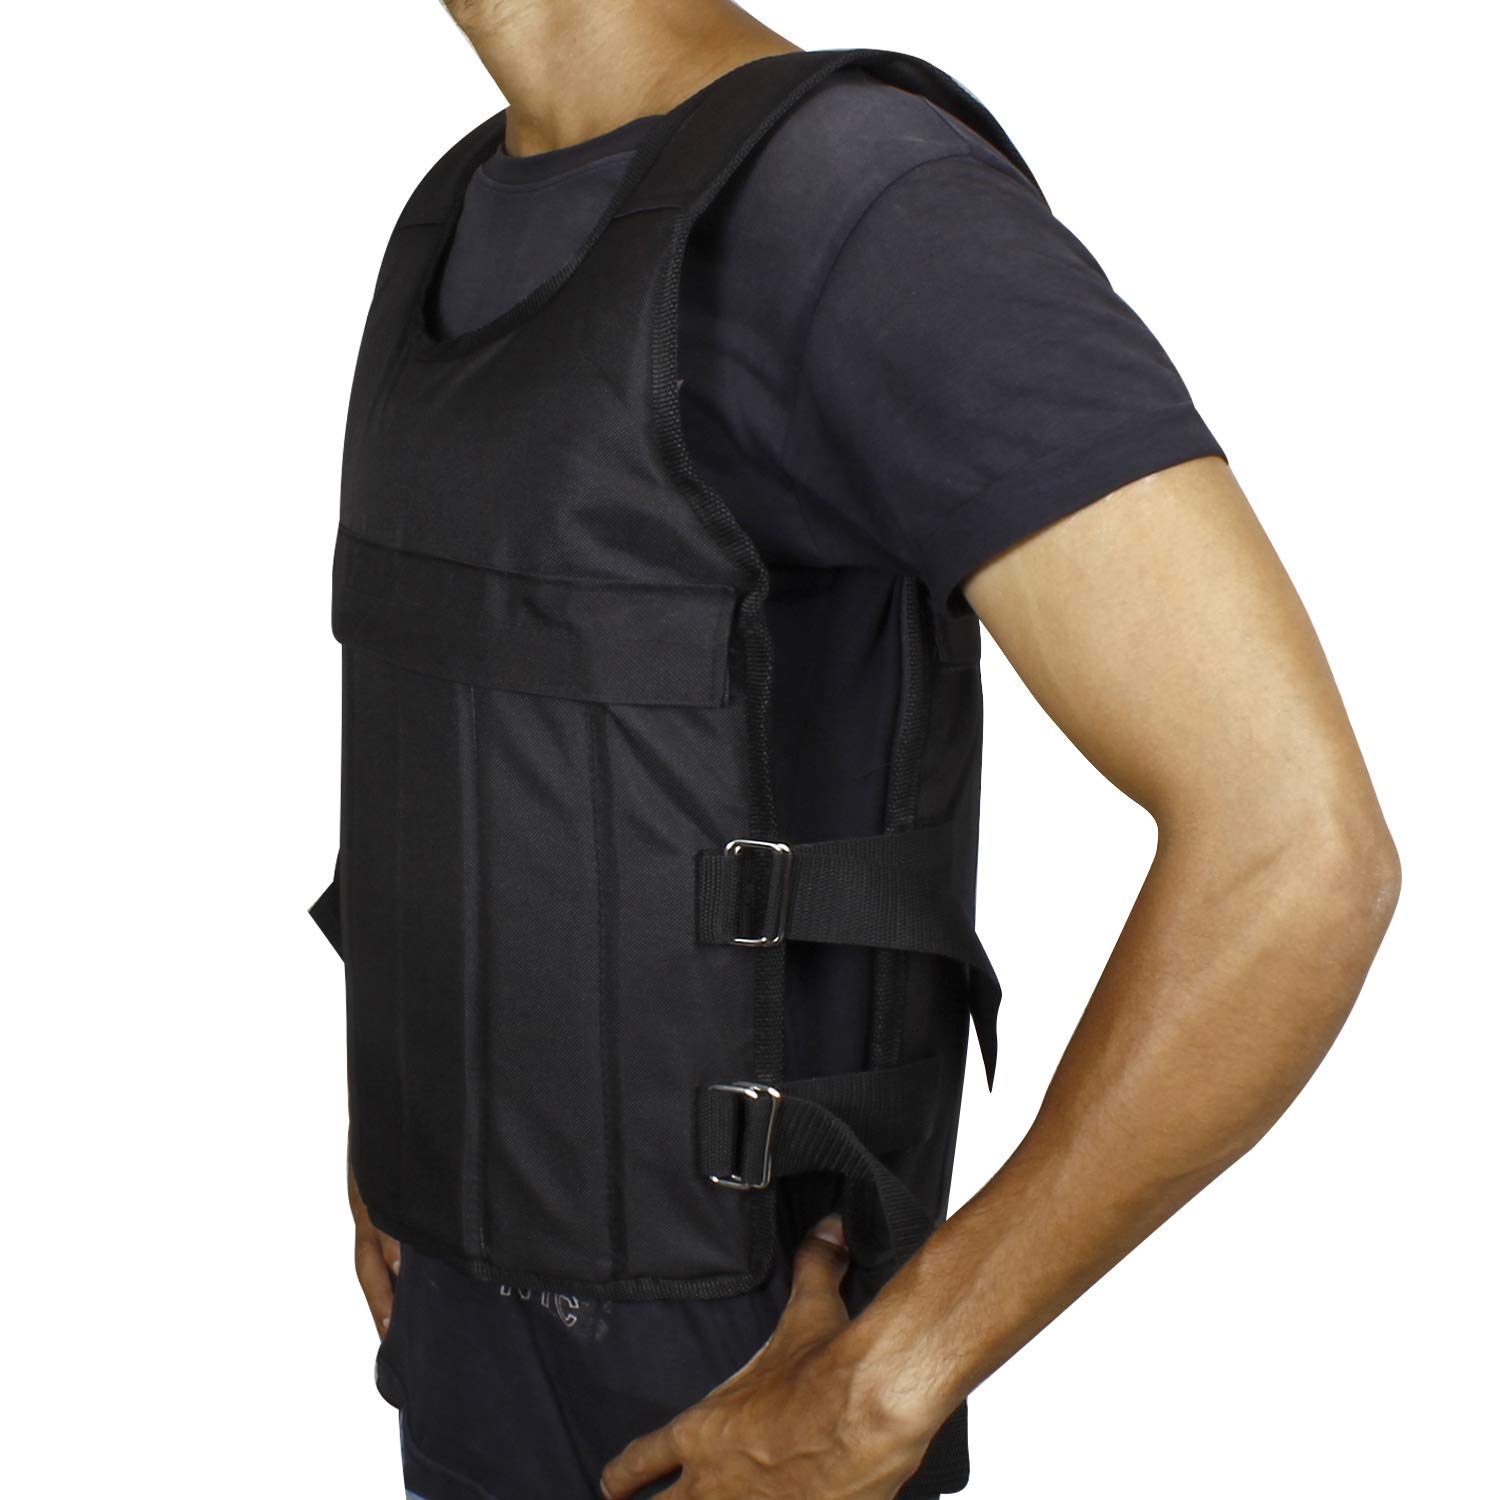 FITSY Adjustable Weighted Vest Online in India